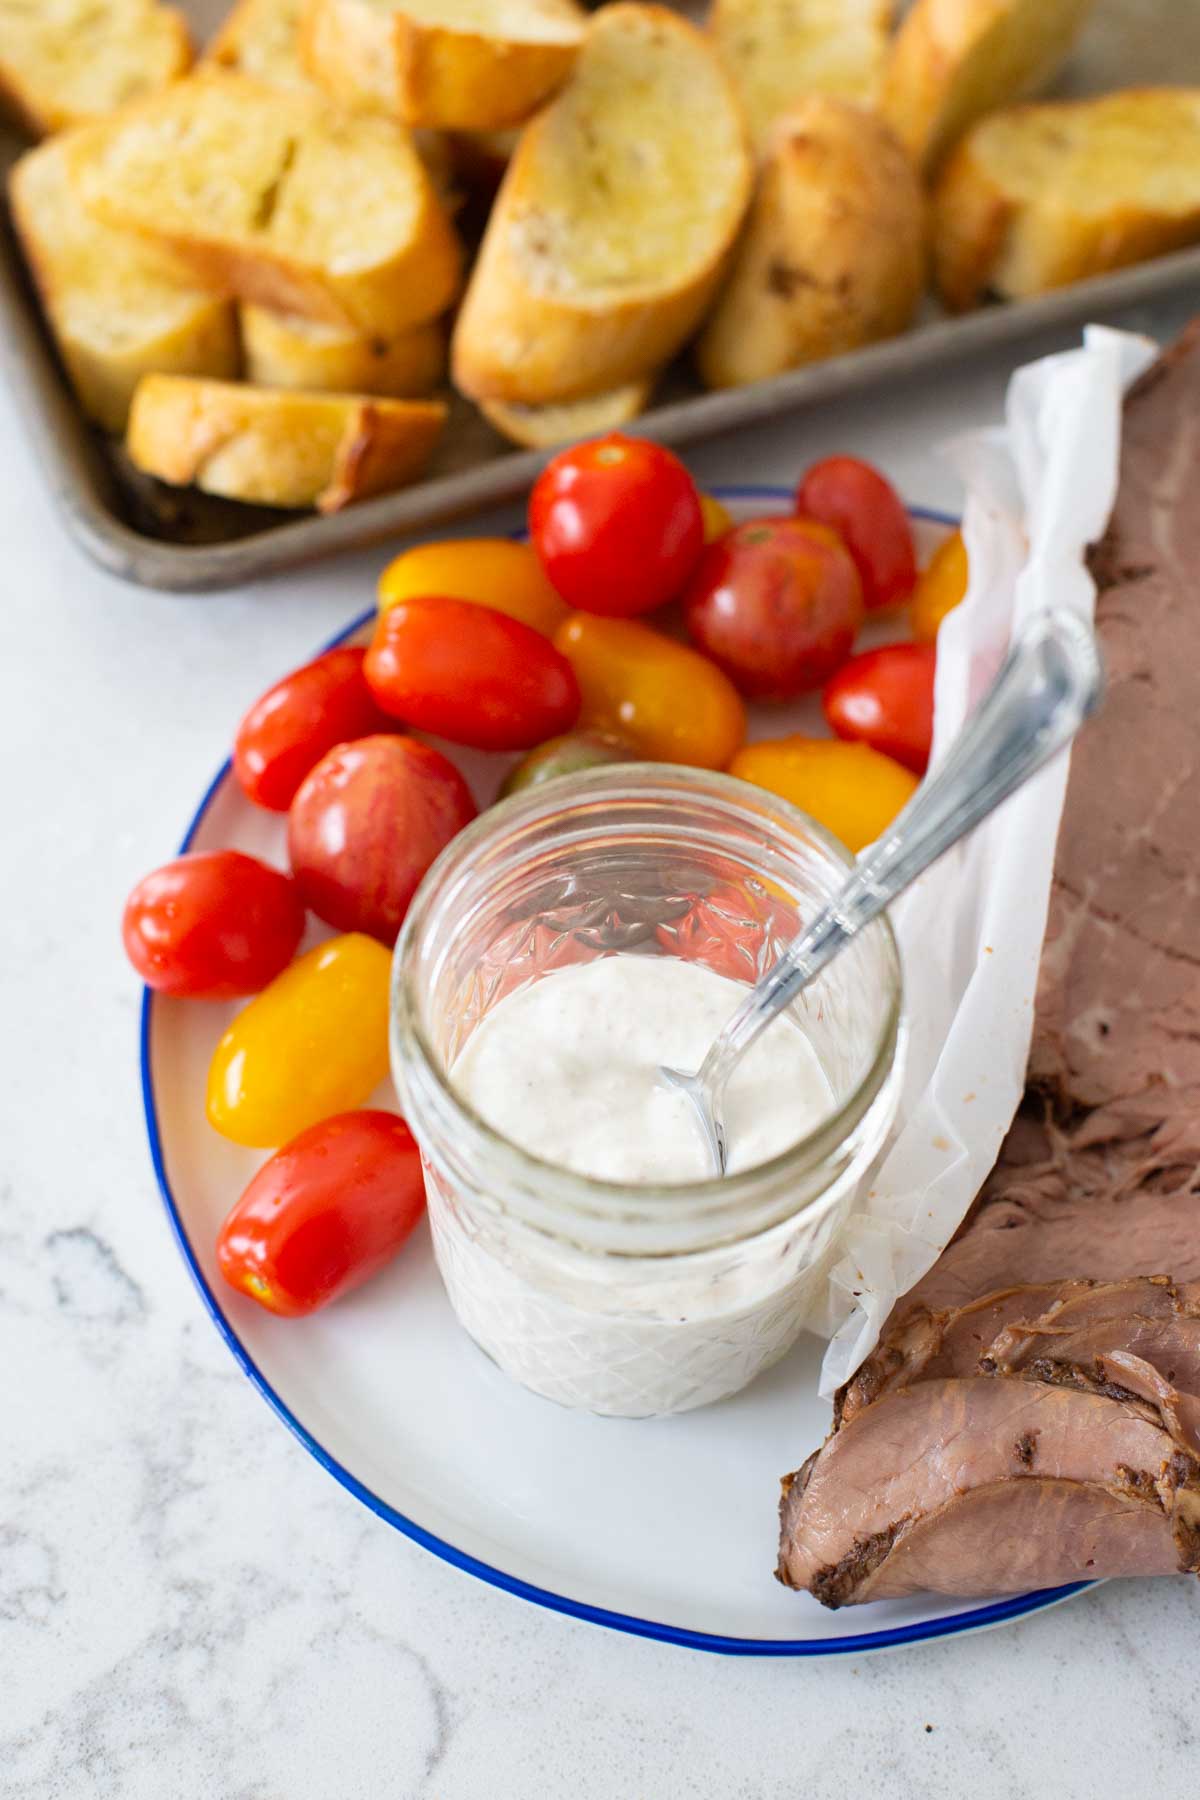 The horseradish sauce sits on a plate next to the roast beef, cherry tomatoes, and a platter of crostini.